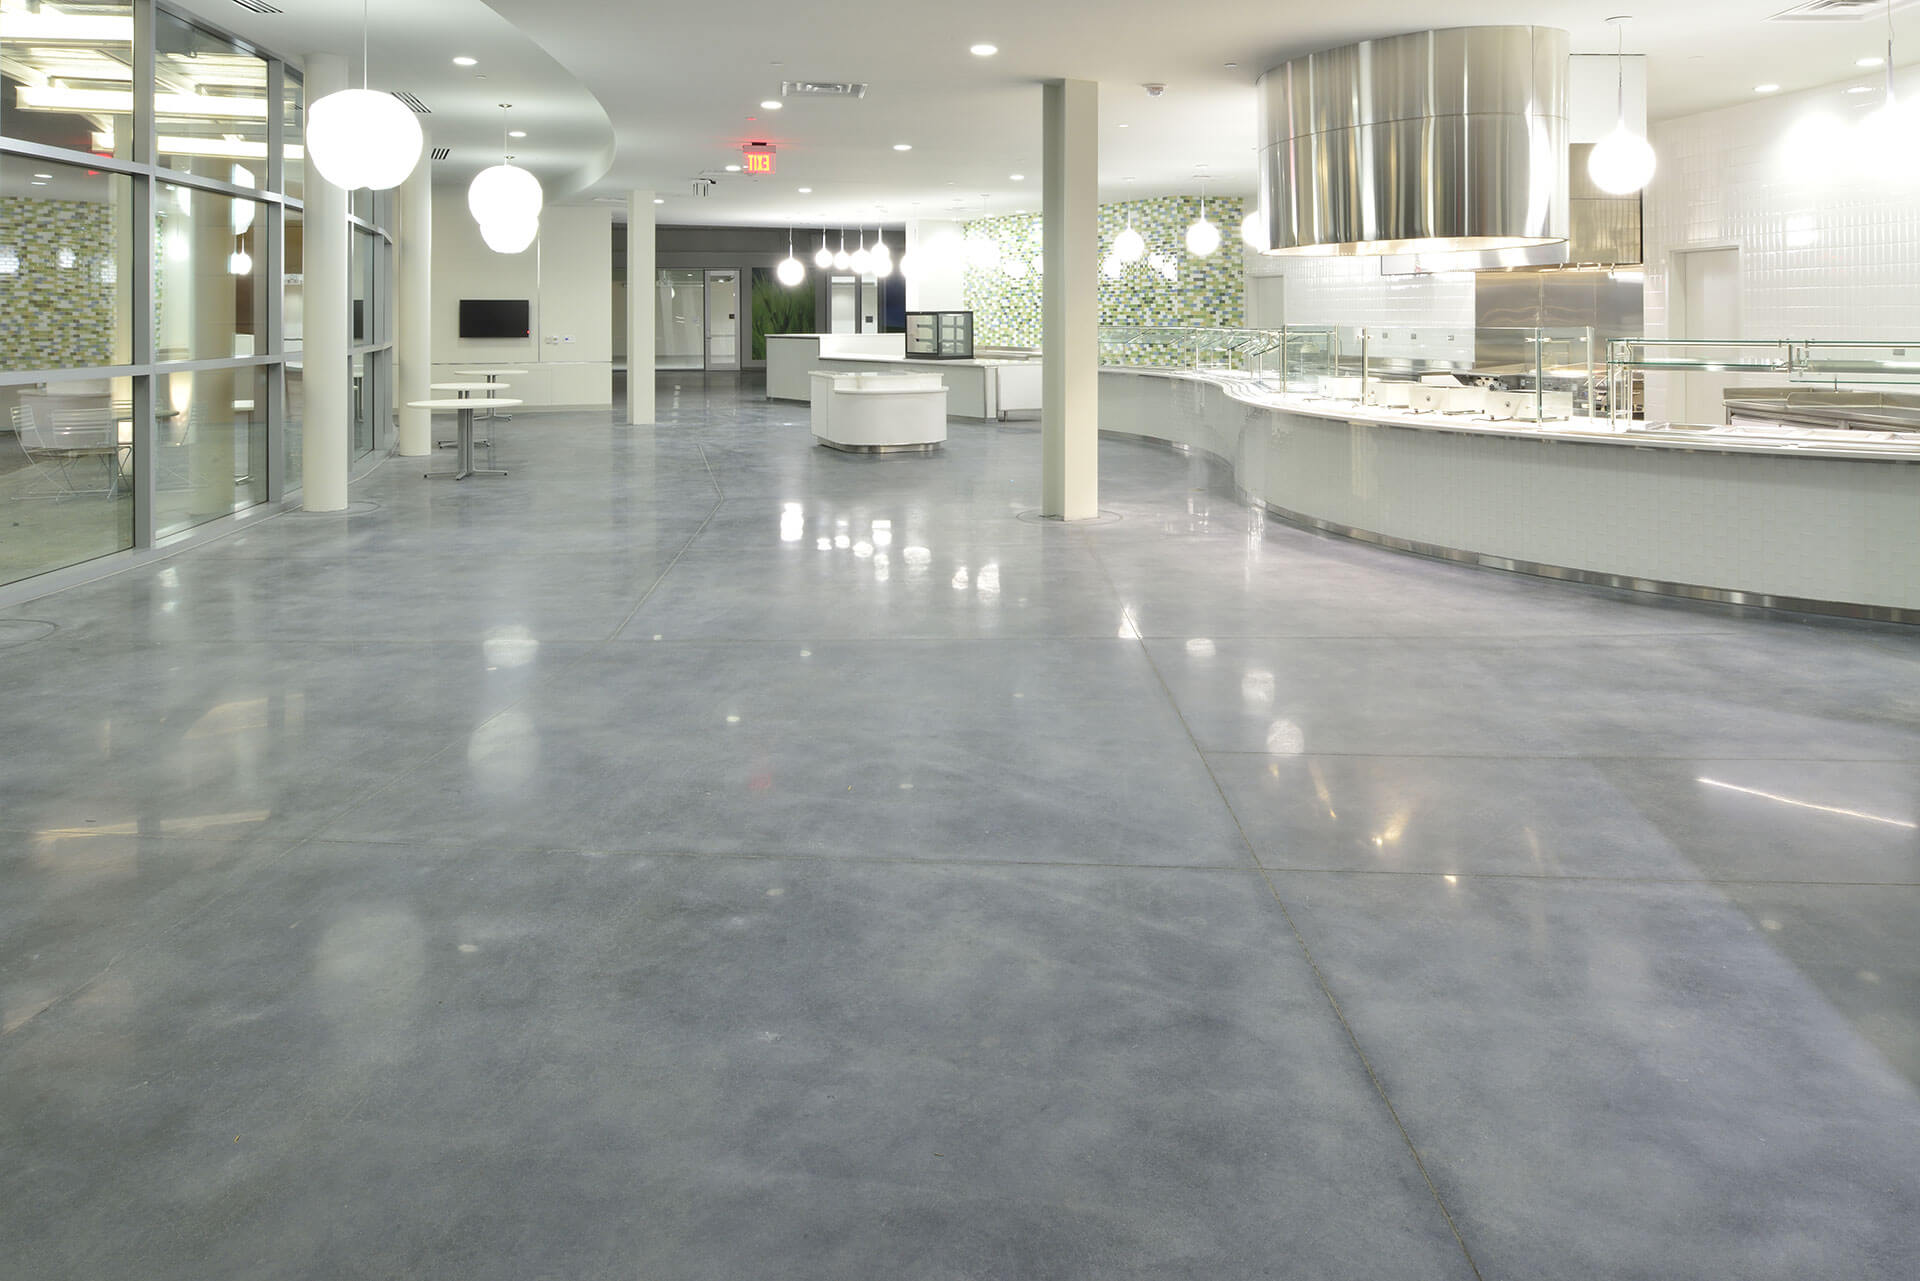 What Are the Benefits of Polished Concrete in Industrial Settings?